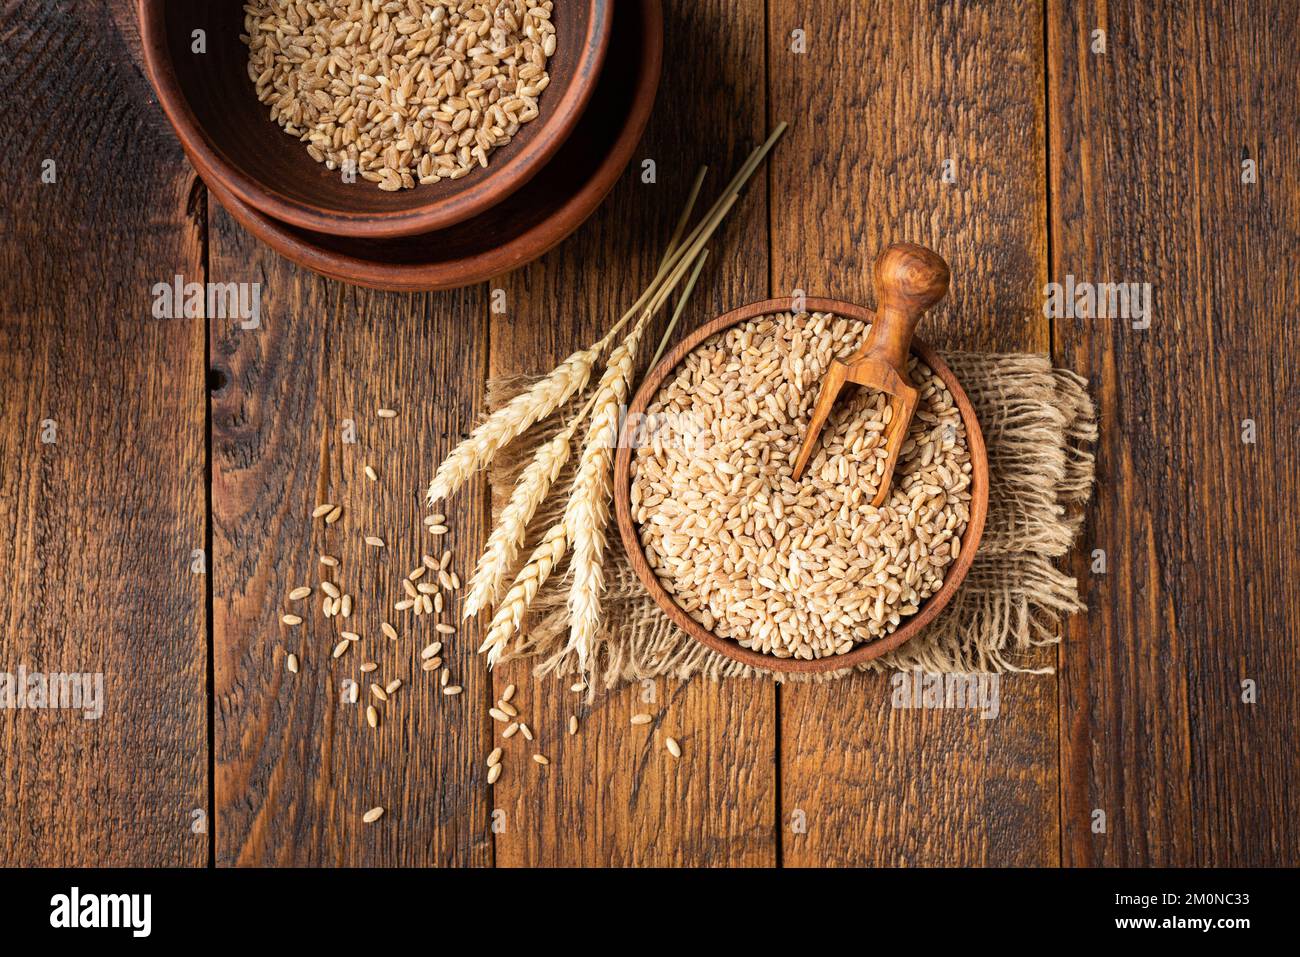 Wheat grains in bowl on a wooden table background. Concept of harvesting, agriculture, baking bread Stock Photo